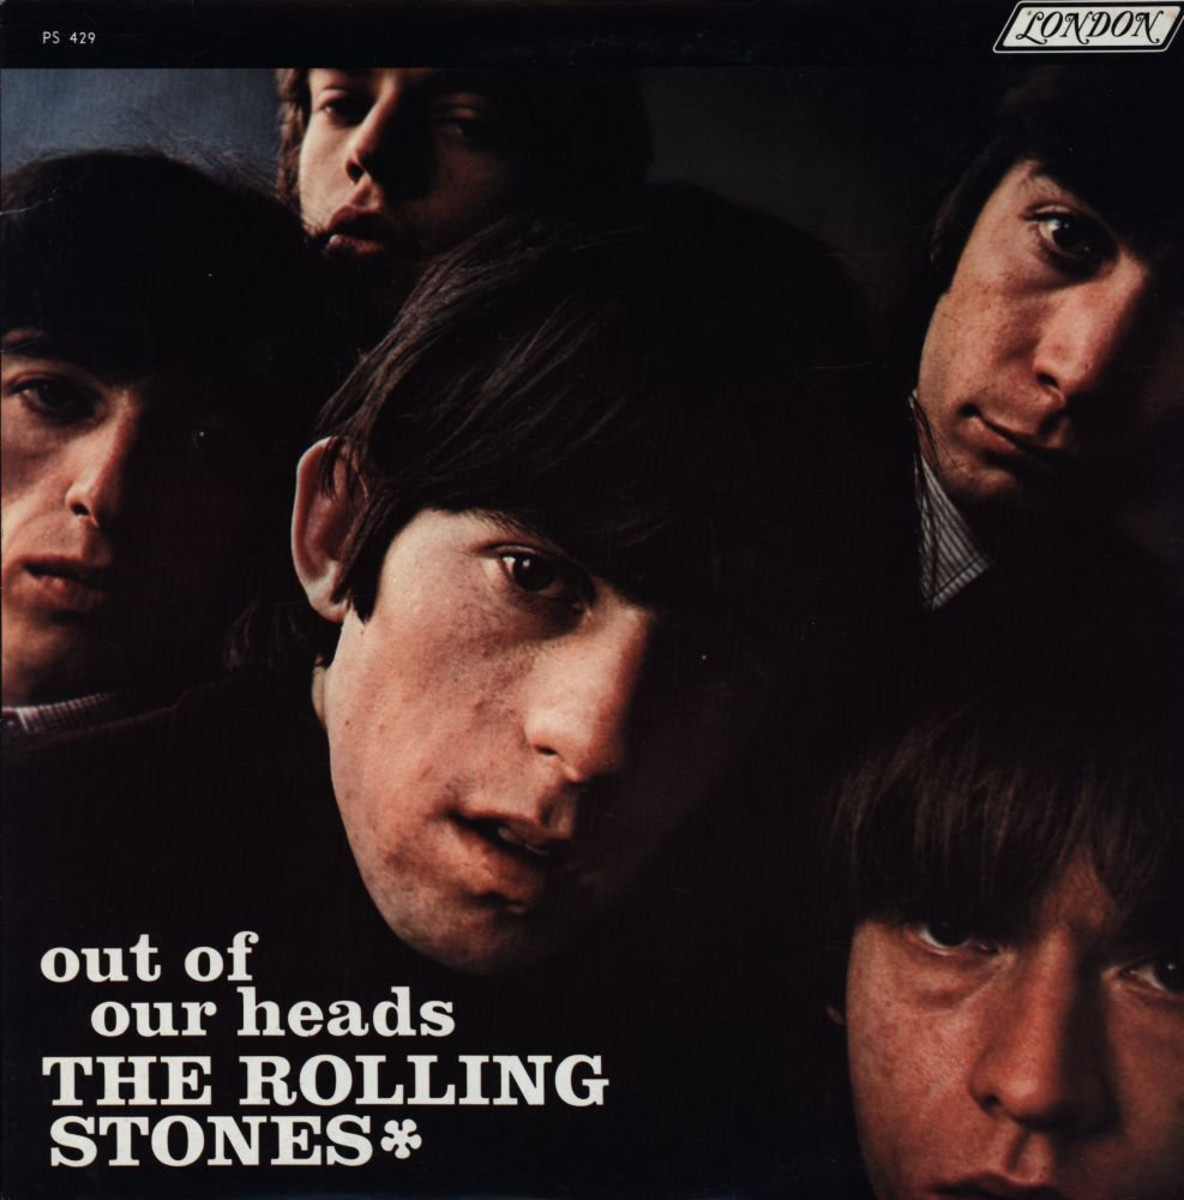 The Rolling Stones, Out of Our Heads